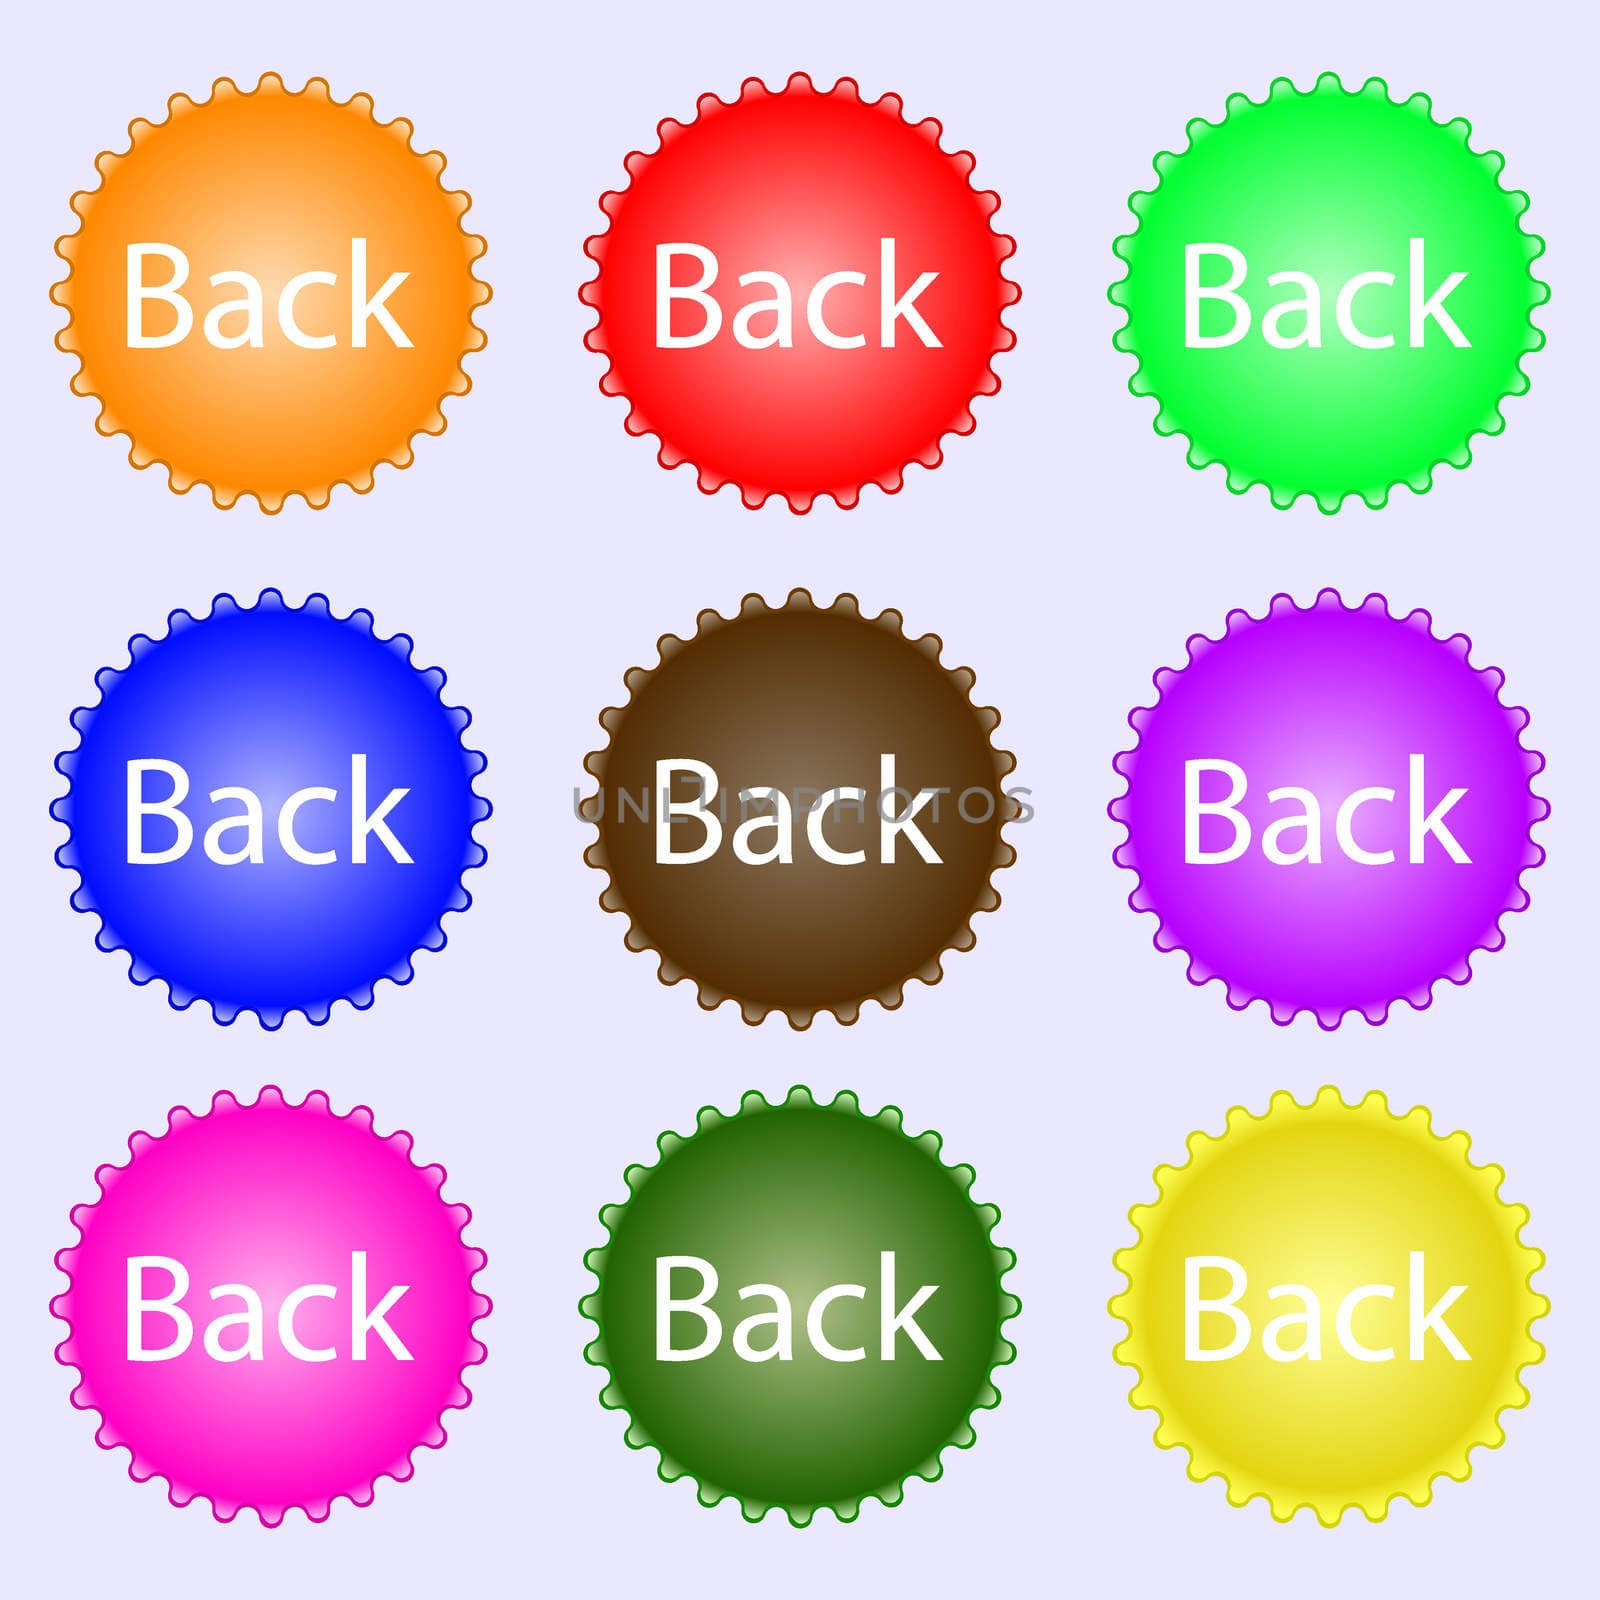 Arrow sign icon. Back button. Navigation symbo. A set of nine different colored labels. illustration